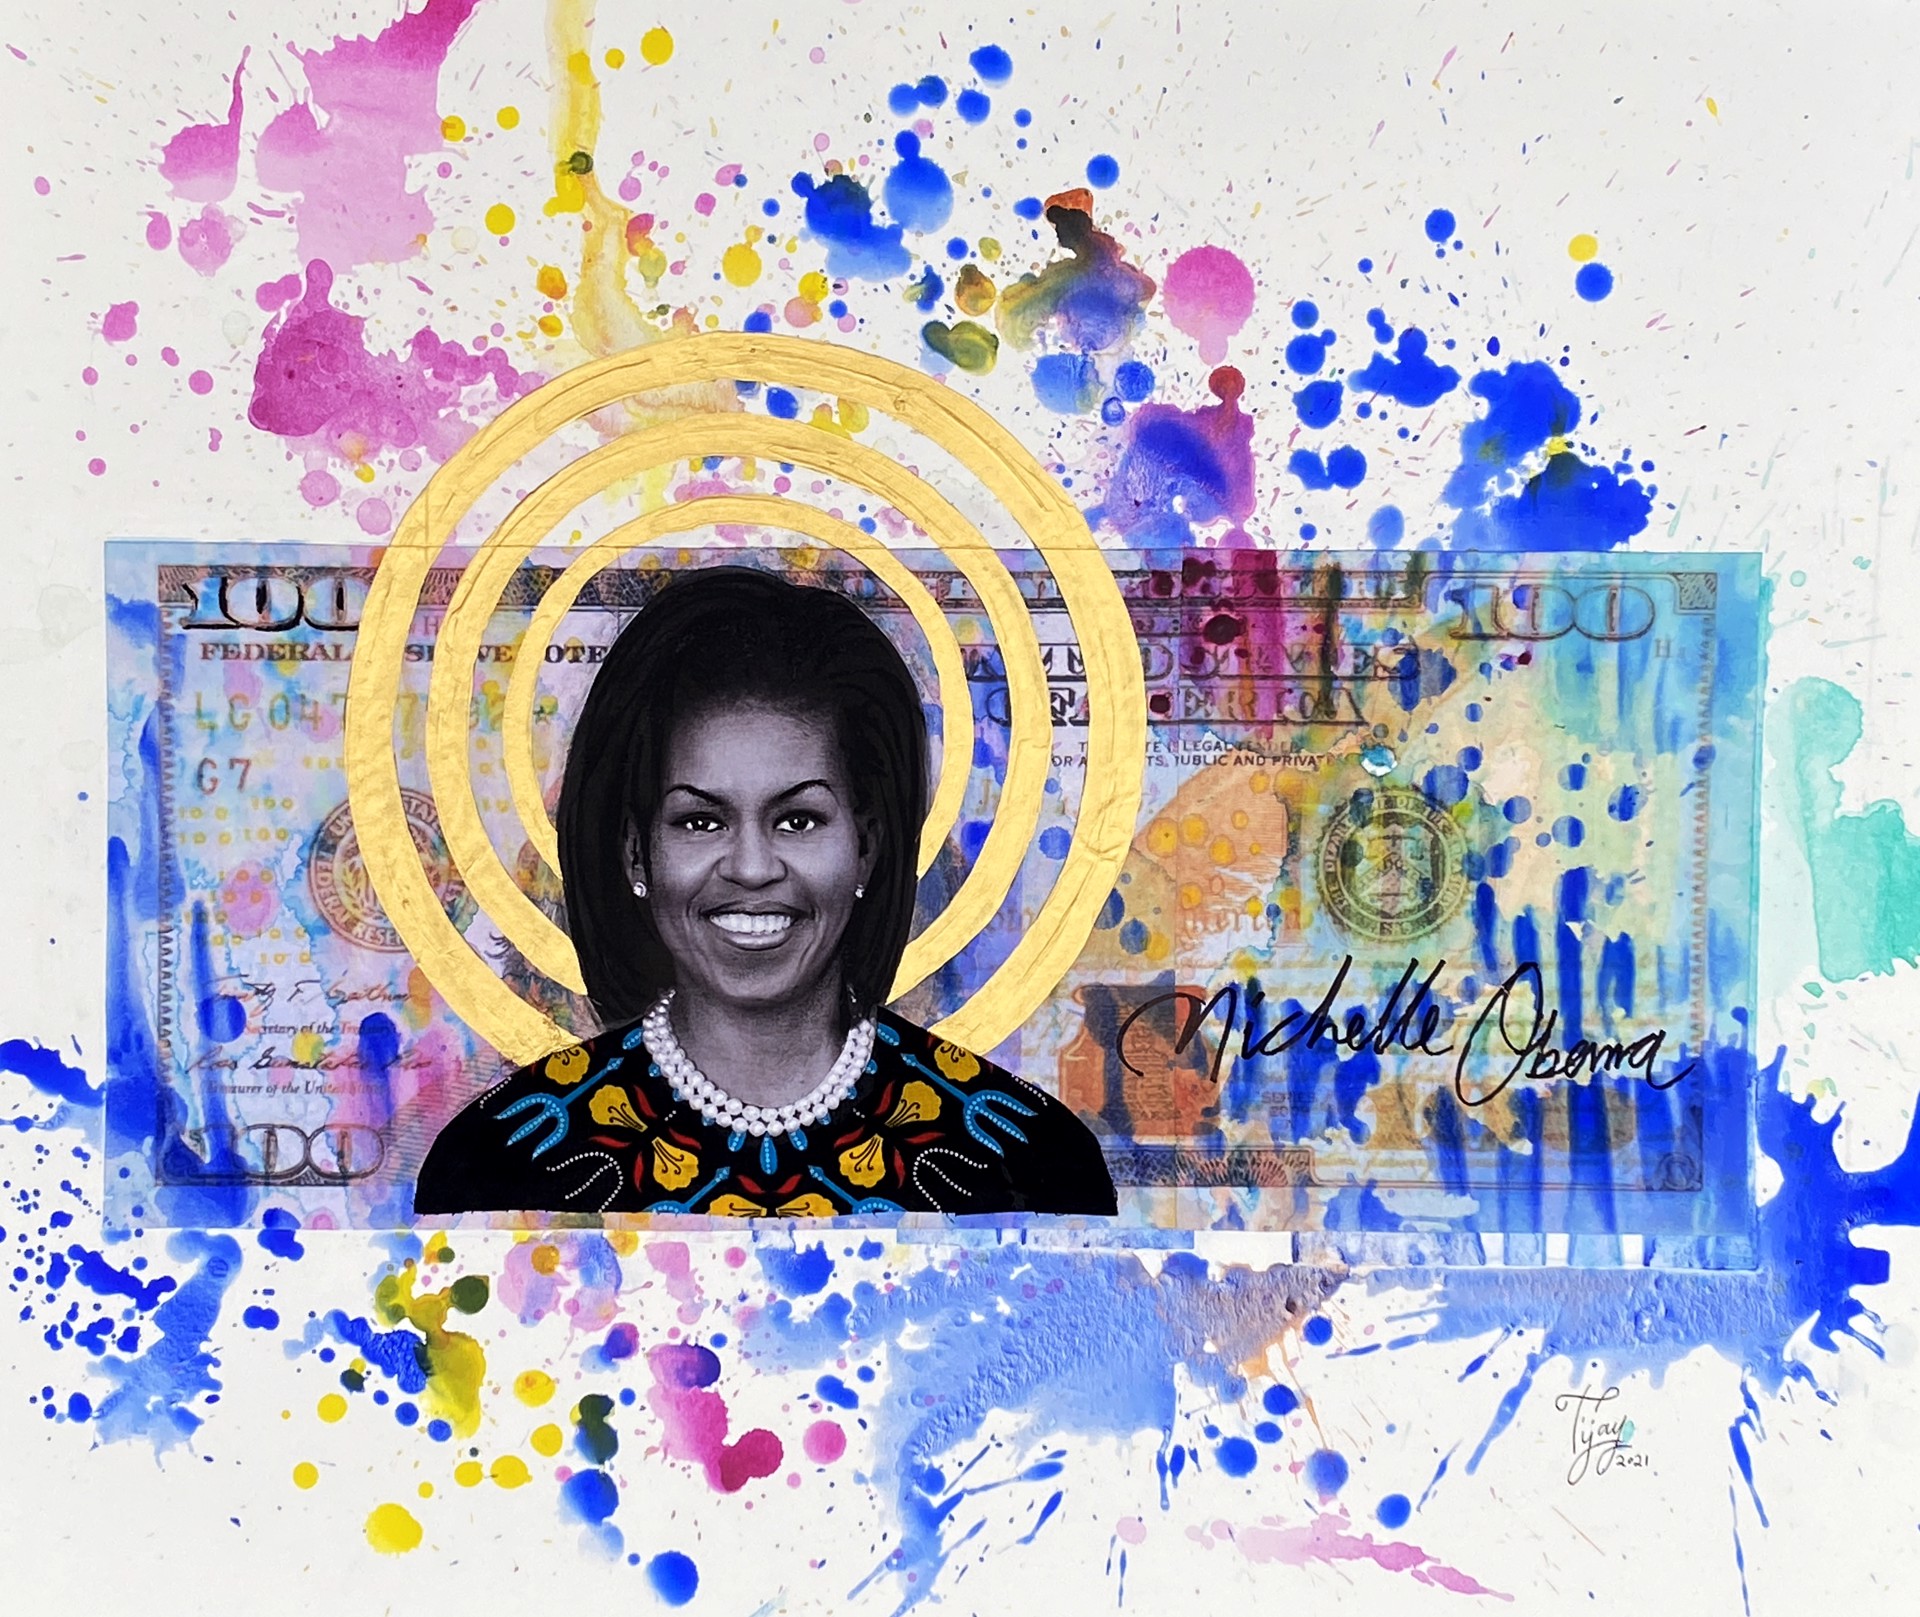 The Pride of Our Village, Michelle Obama by Tijay Mohammed